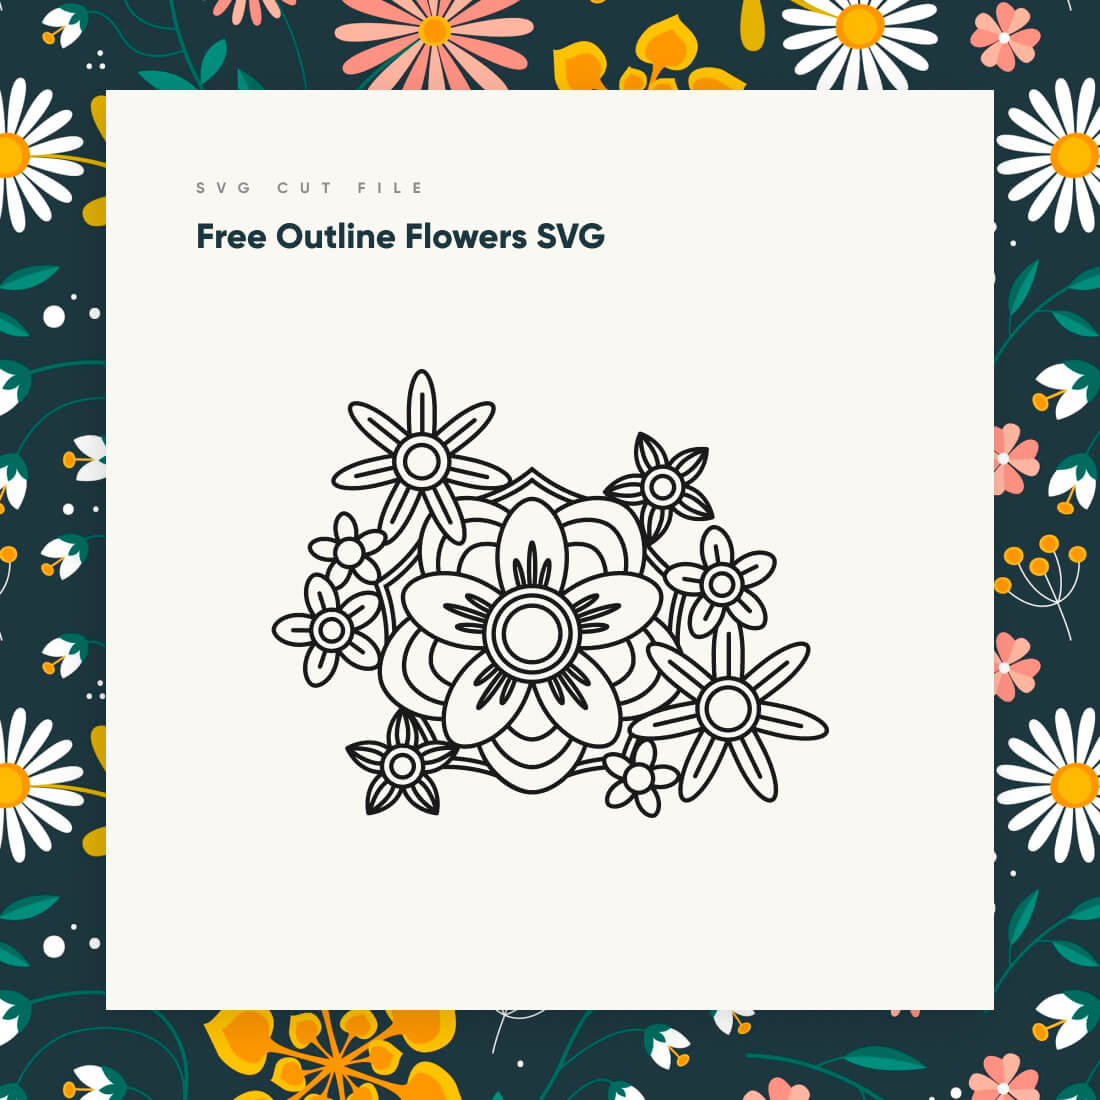 Free Outline Flowers SVG cover image.